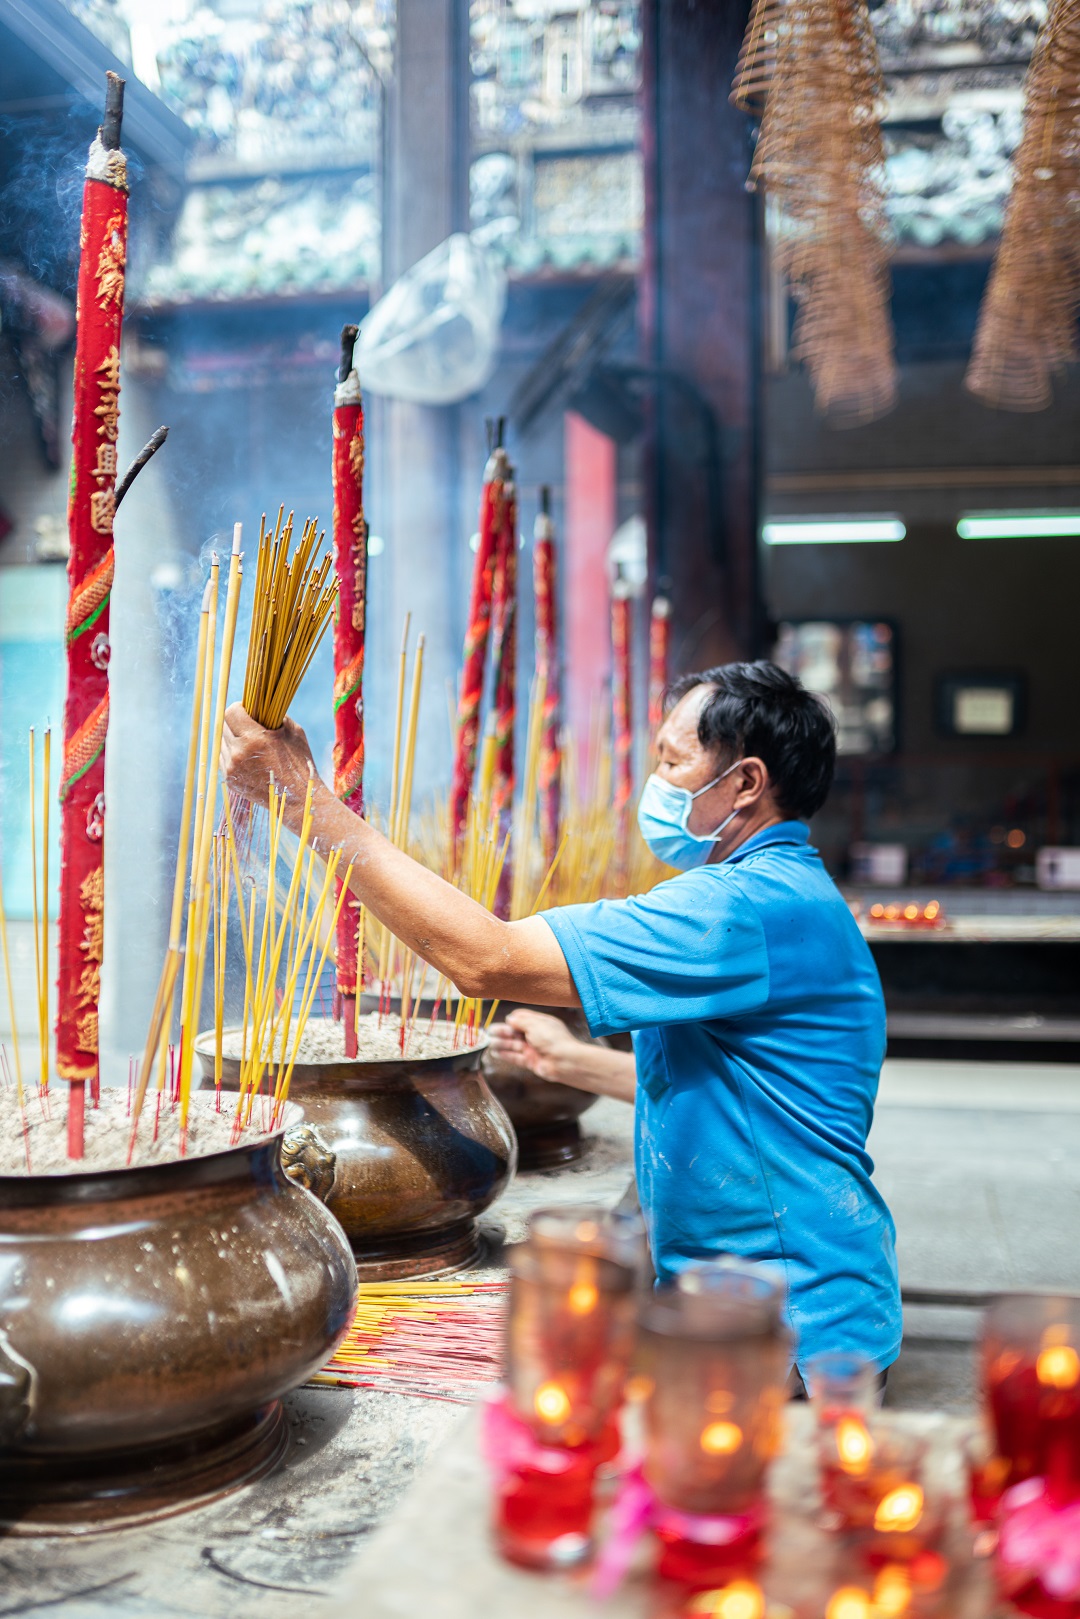 If there are many incense sticks in censers, they will be taken out to reduce smoke to ensure the health of visitors. Photo: Nguyen Trung Au / Tuoi Tre News